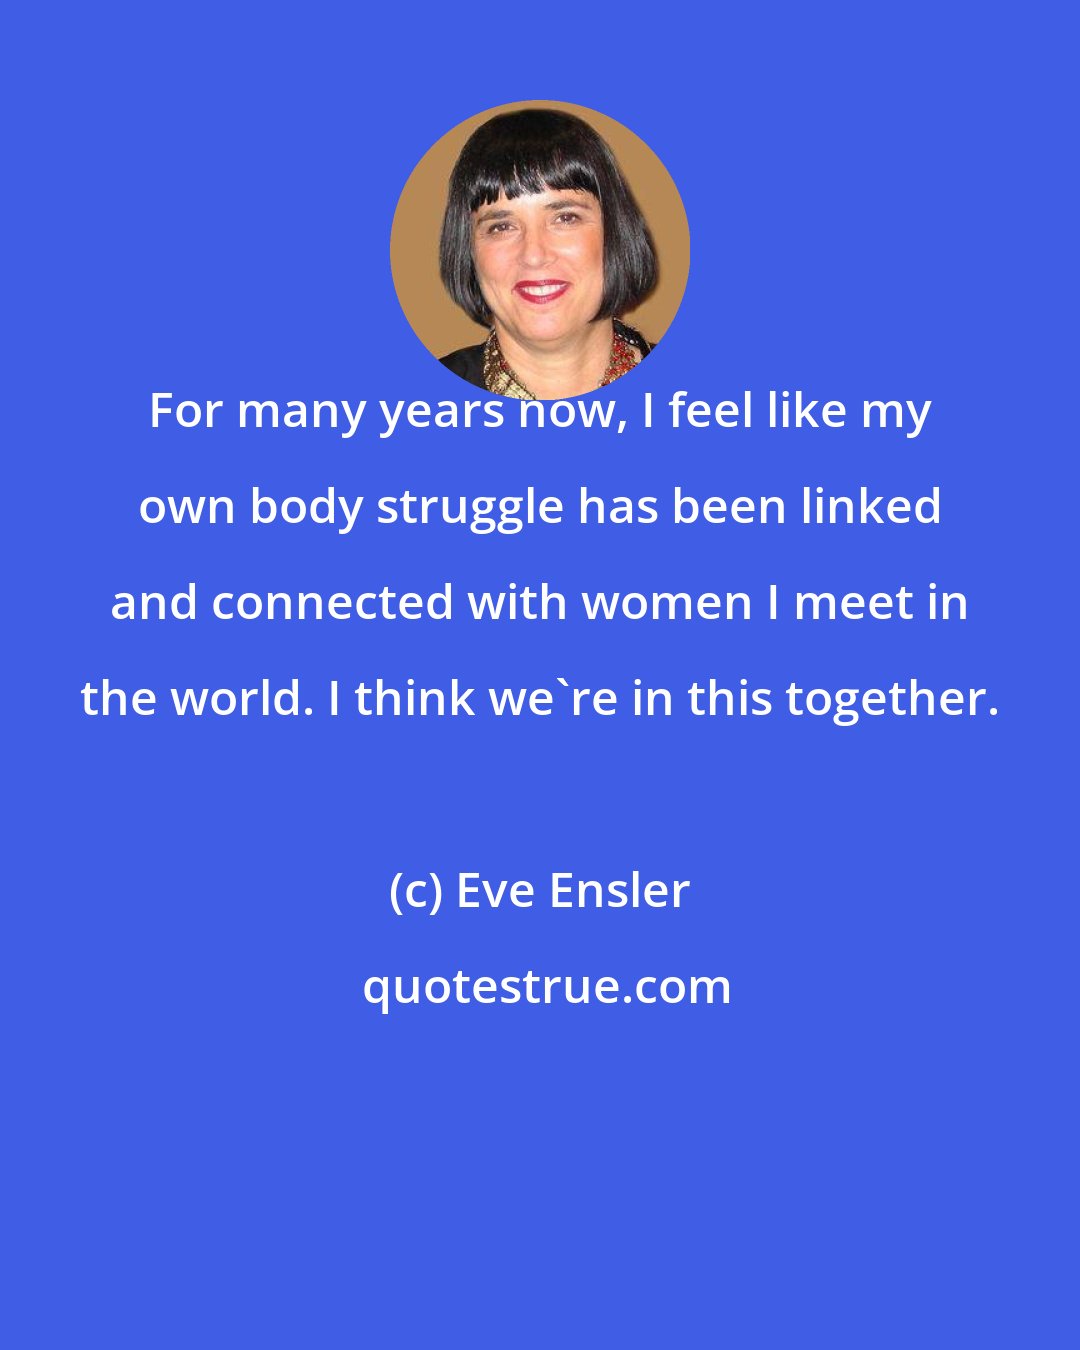 Eve Ensler: For many years now, I feel like my own body struggle has been linked and connected with women I meet in the world. I think we're in this together.